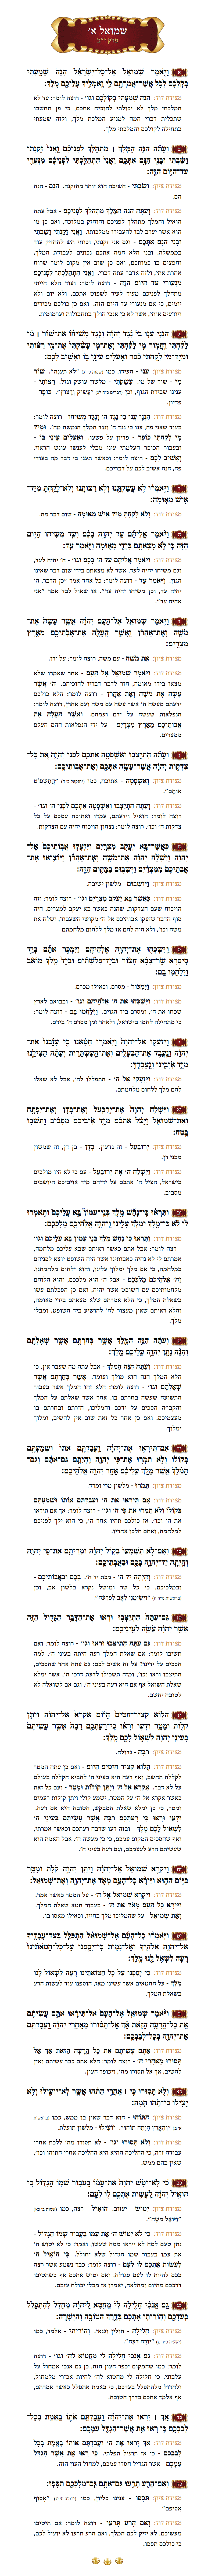 Sefer Shmuel 1 Chapter 12 with commentary